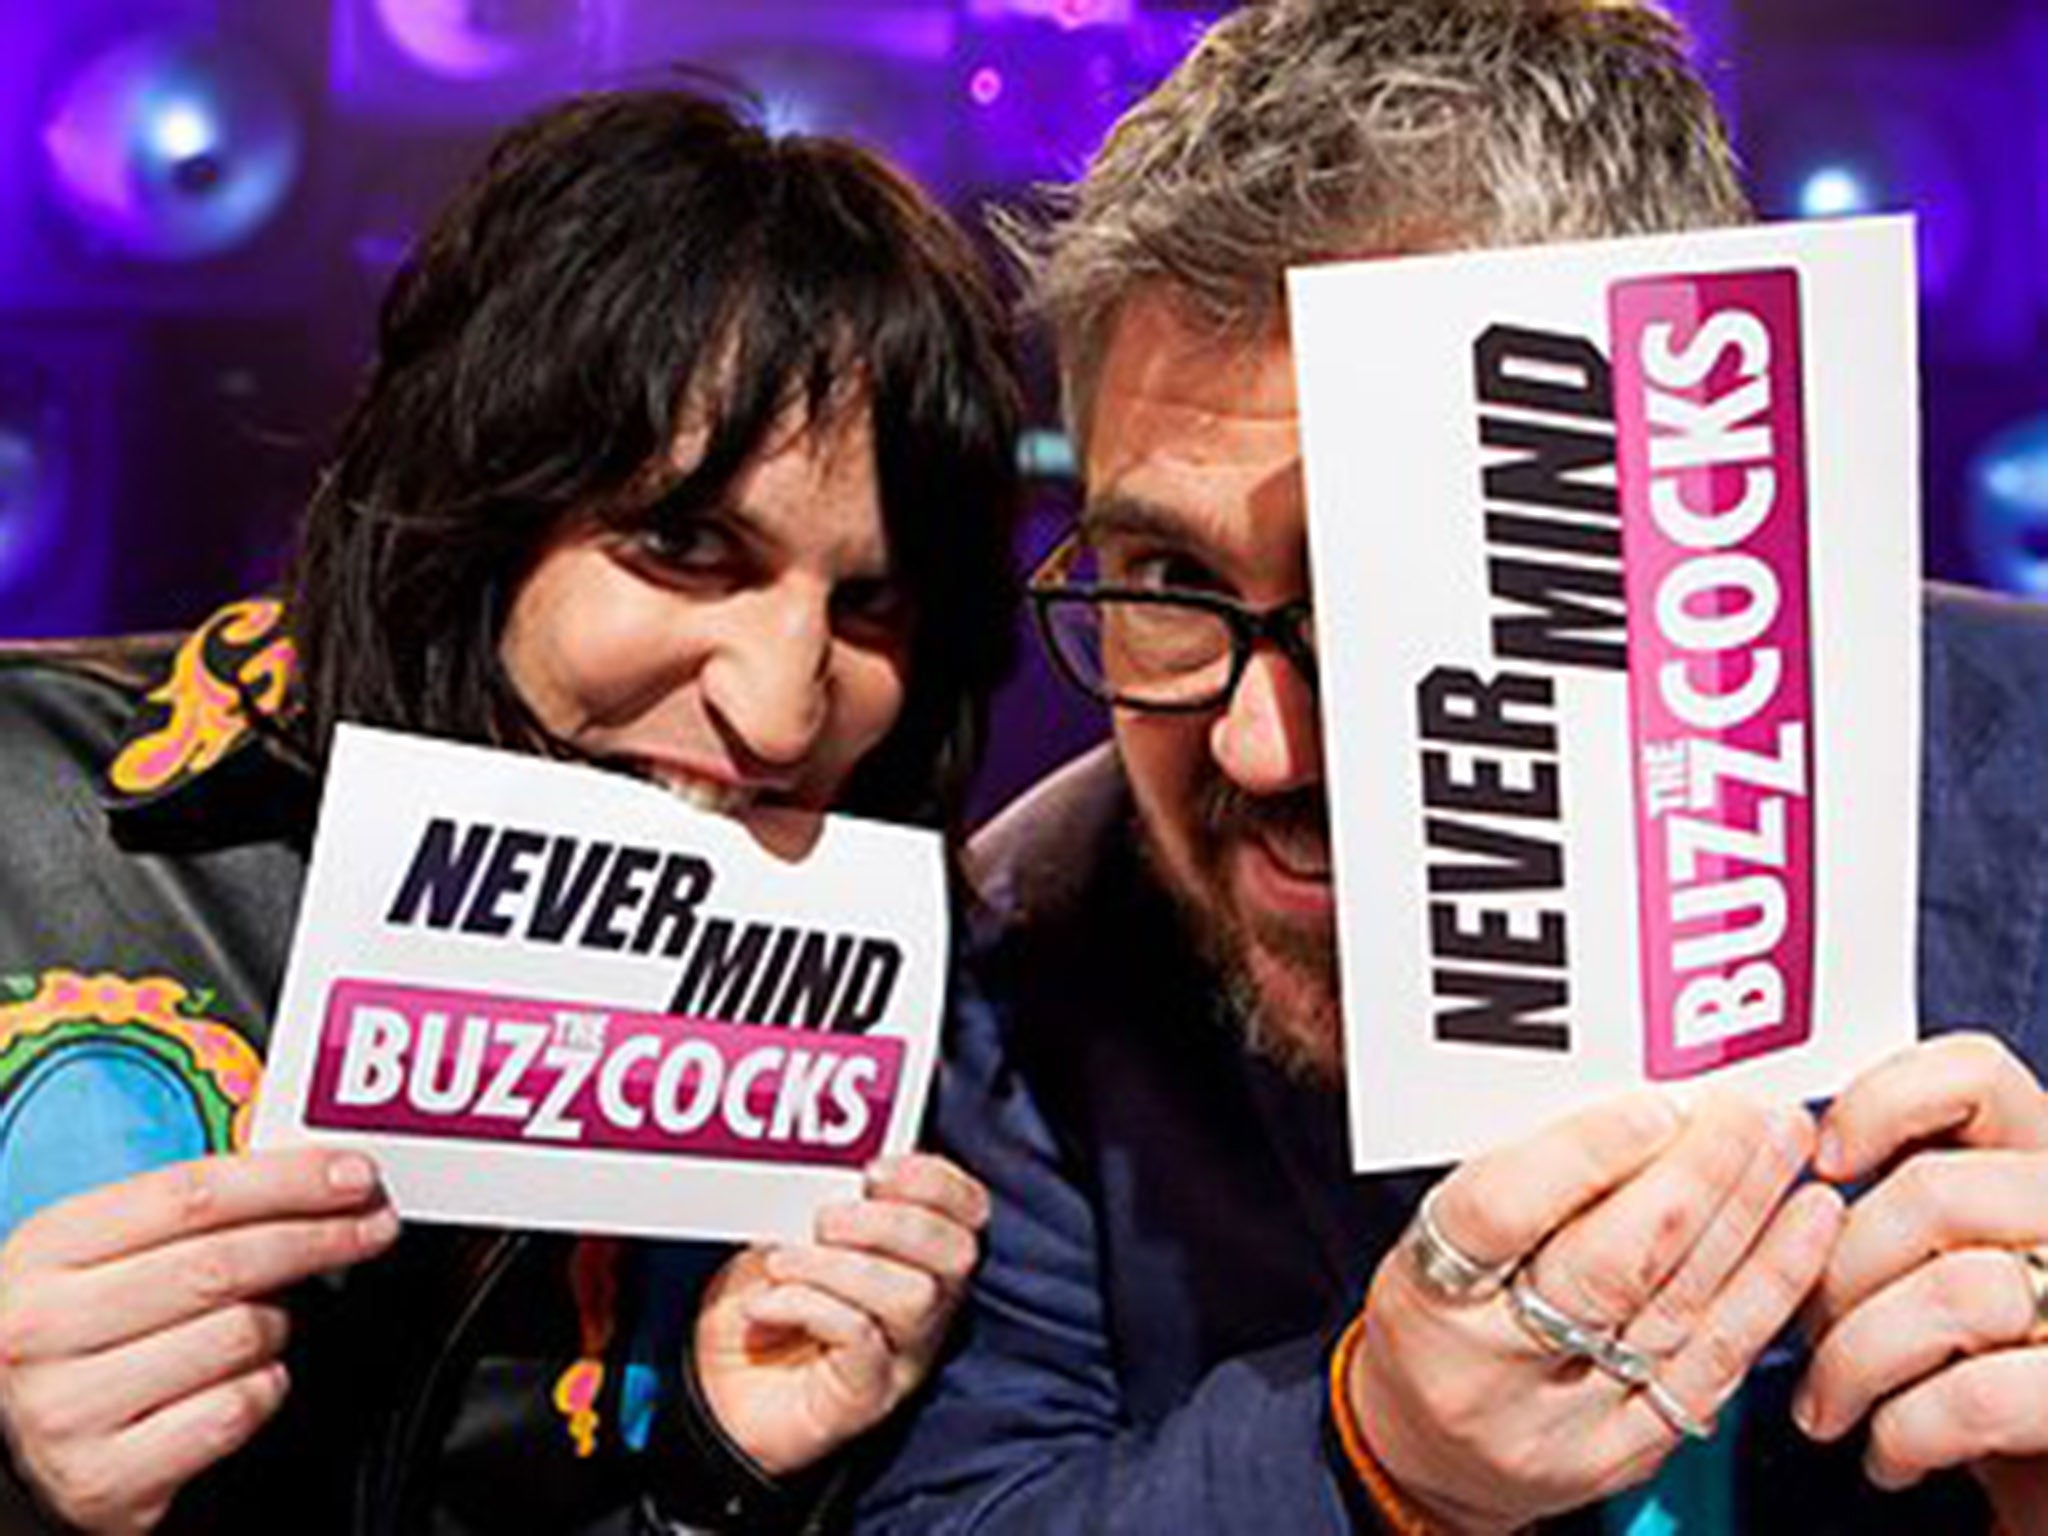 Never Mind the Buzzcocks first launched back in 1996